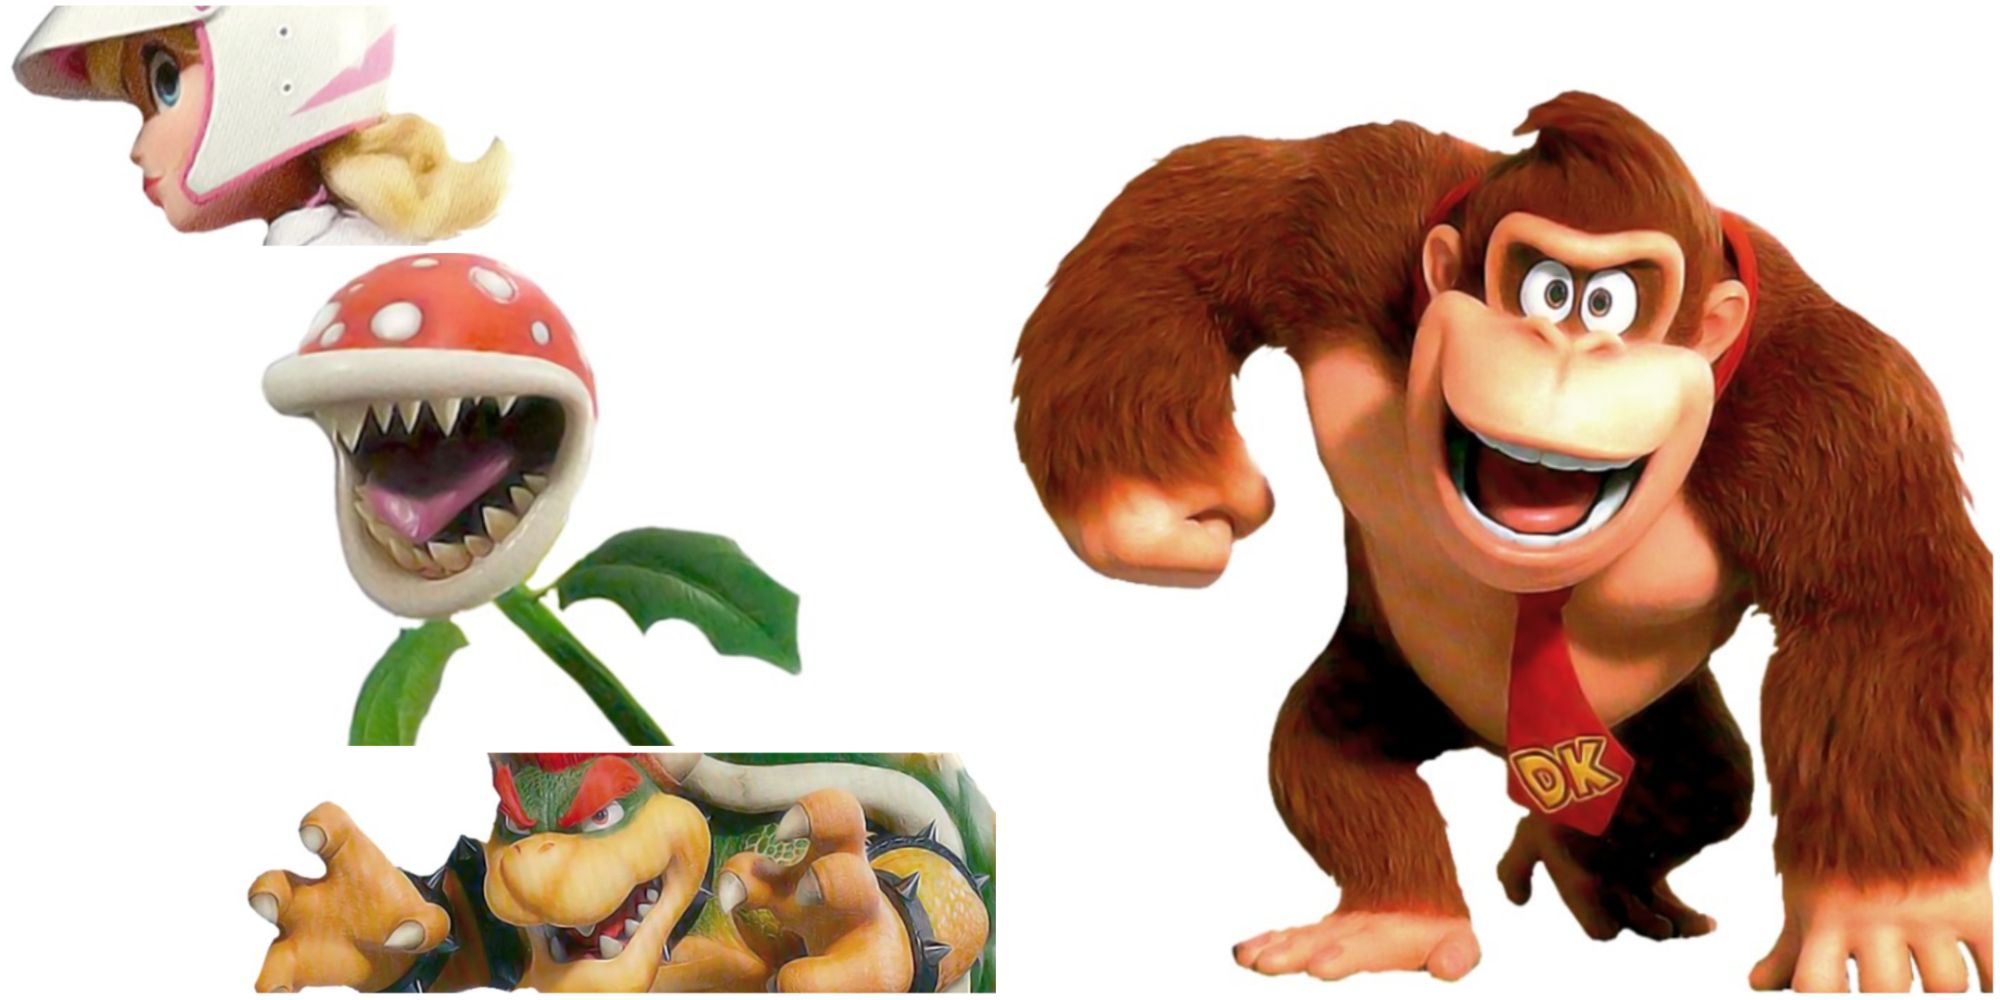 Banner image for the French McDonald's Mario Bros Movie promotion, showing scanned renders of Peach, Piranha Plant, Bowser, and Donkey Kong